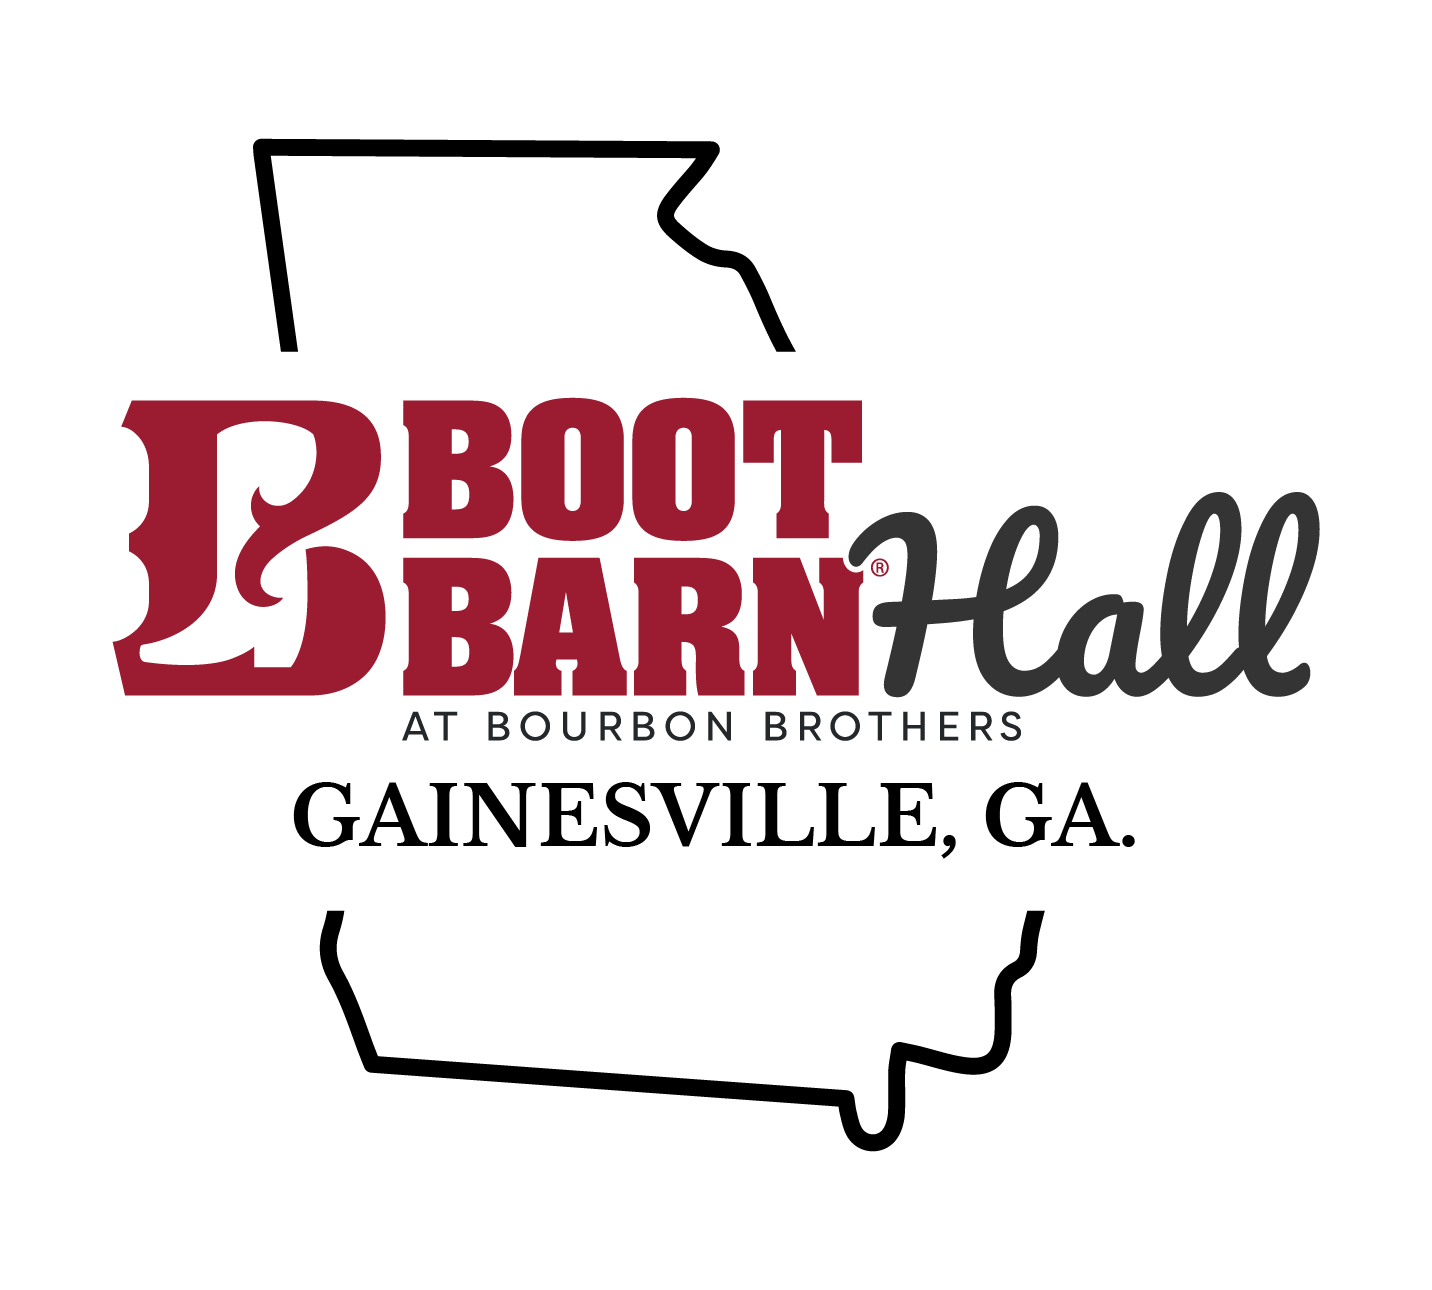 About: Boot Barn (Google Play version)